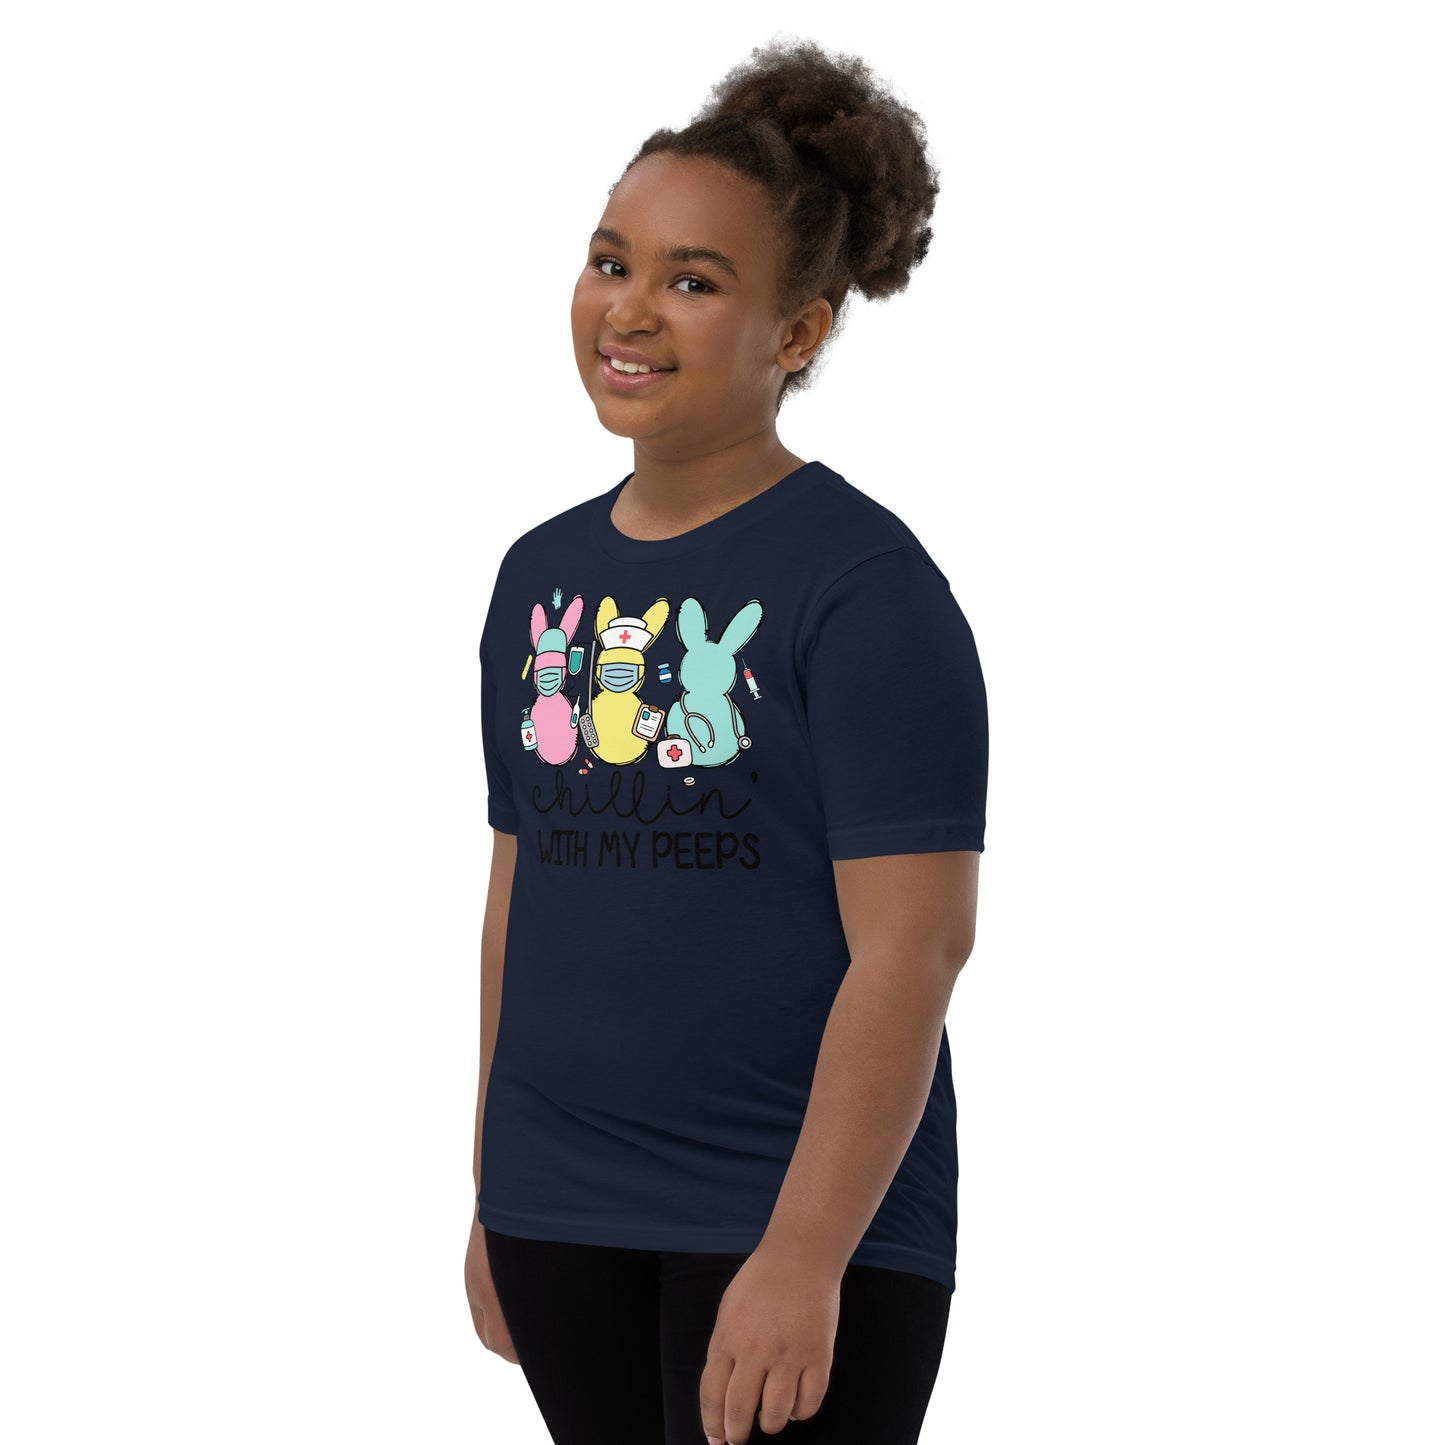 Youth Short Sleeve T-Shirt - Chillin' With My Peeps